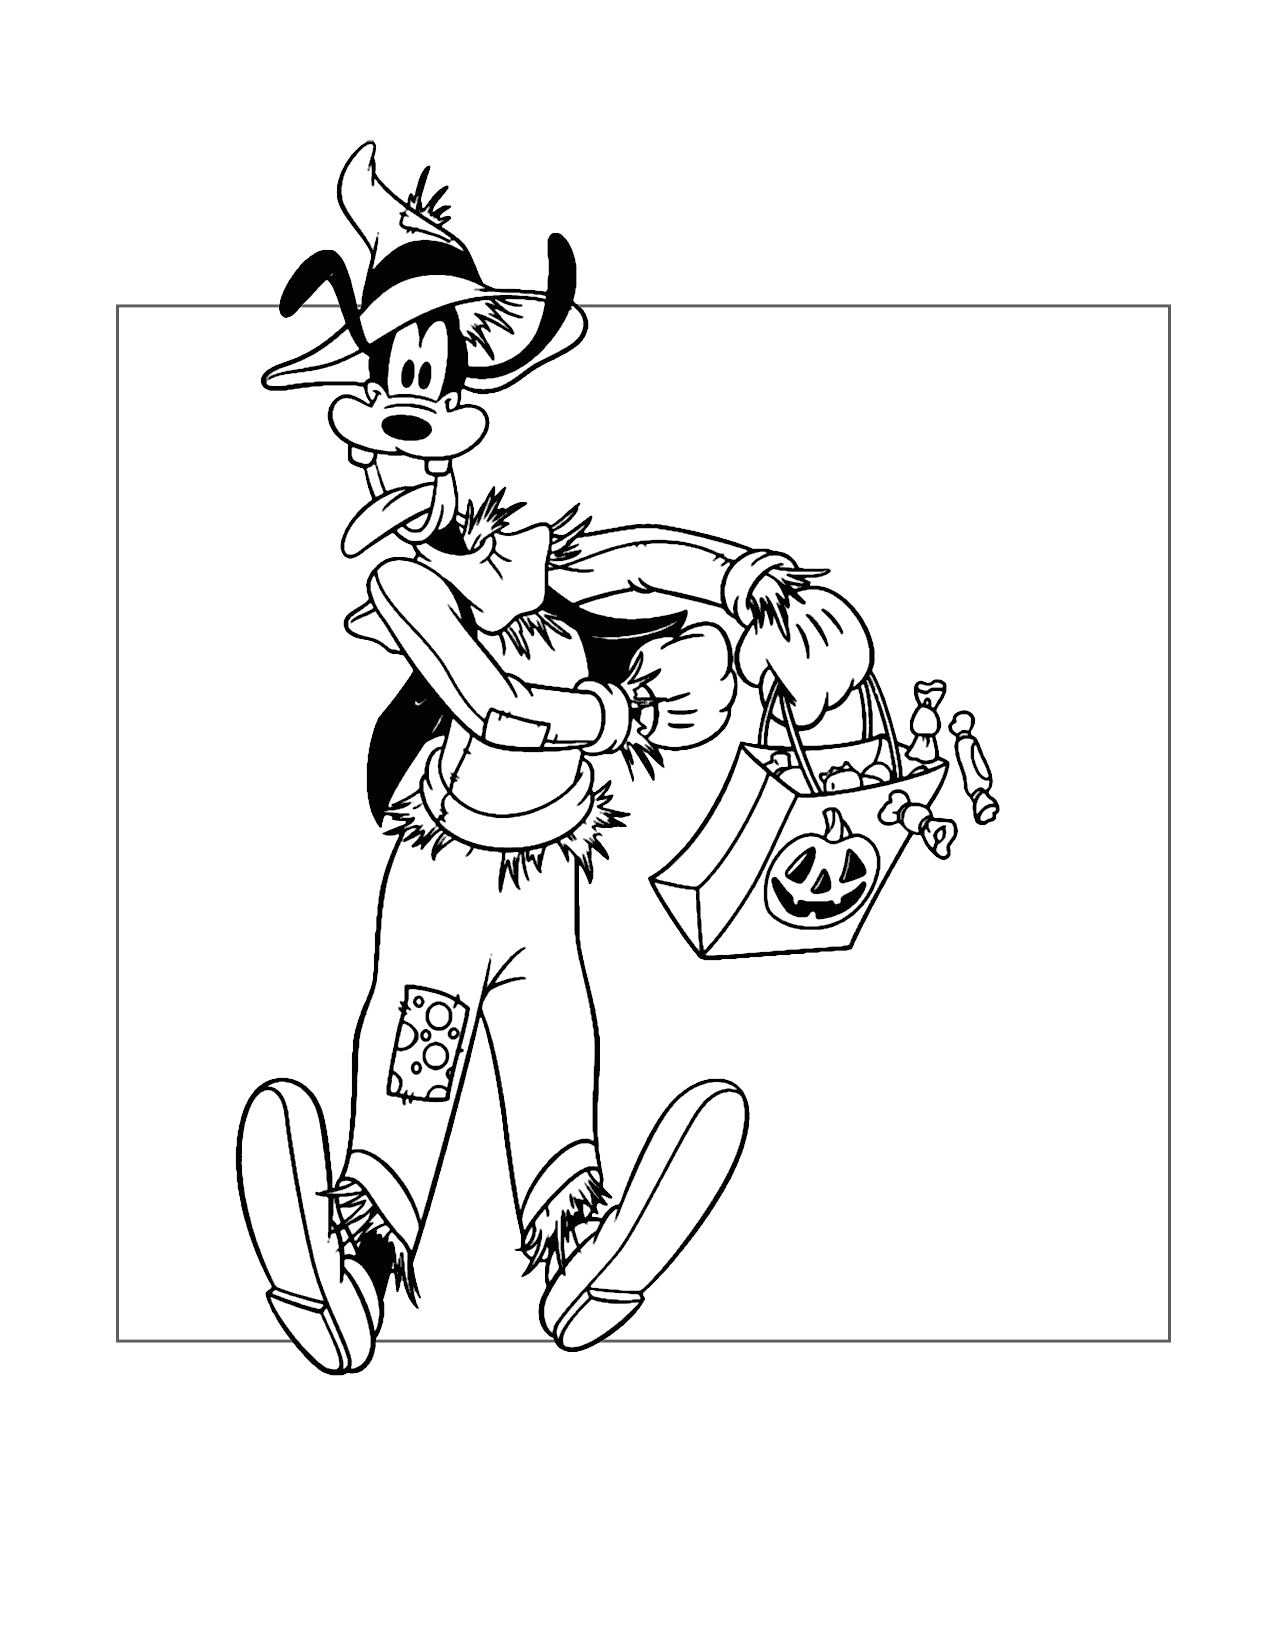 Goofys Halloween Costume Coloring Page